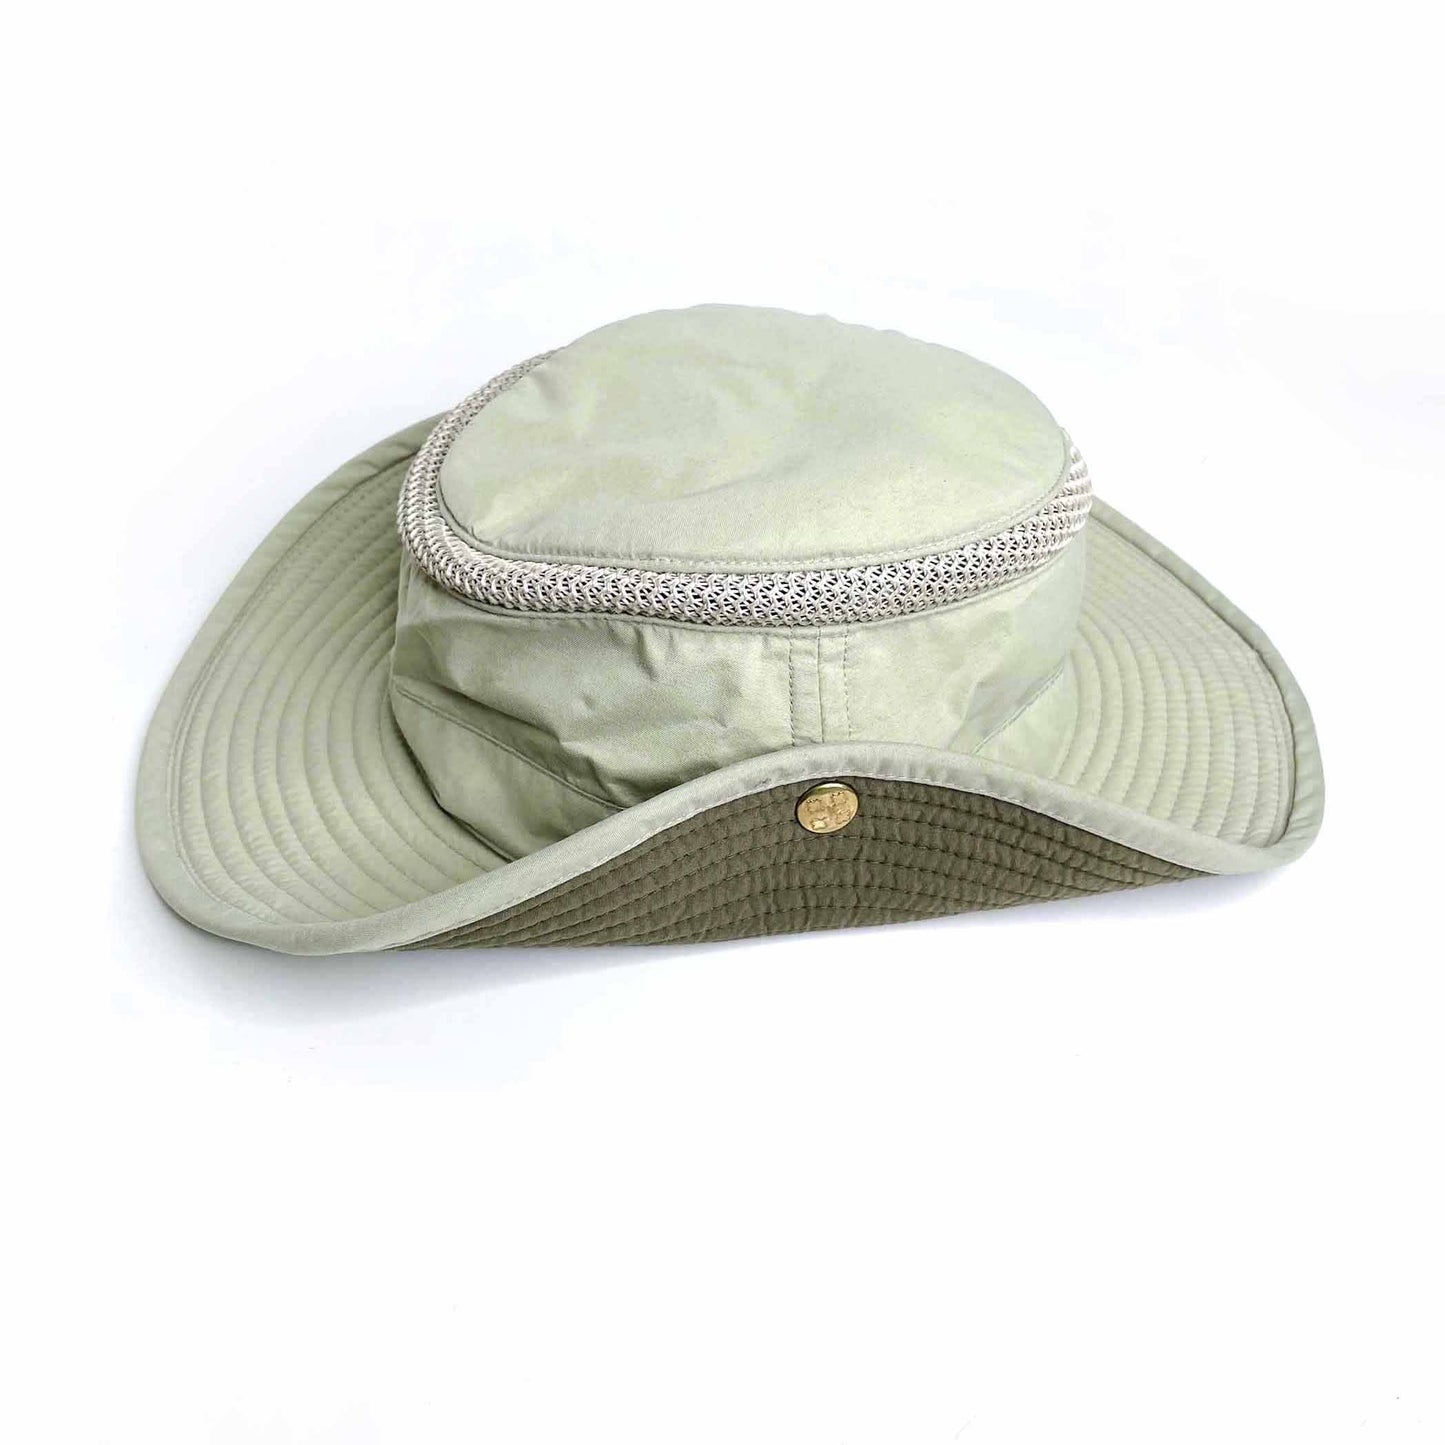 tilley airflo outdoor utility hat - size 7 3/8